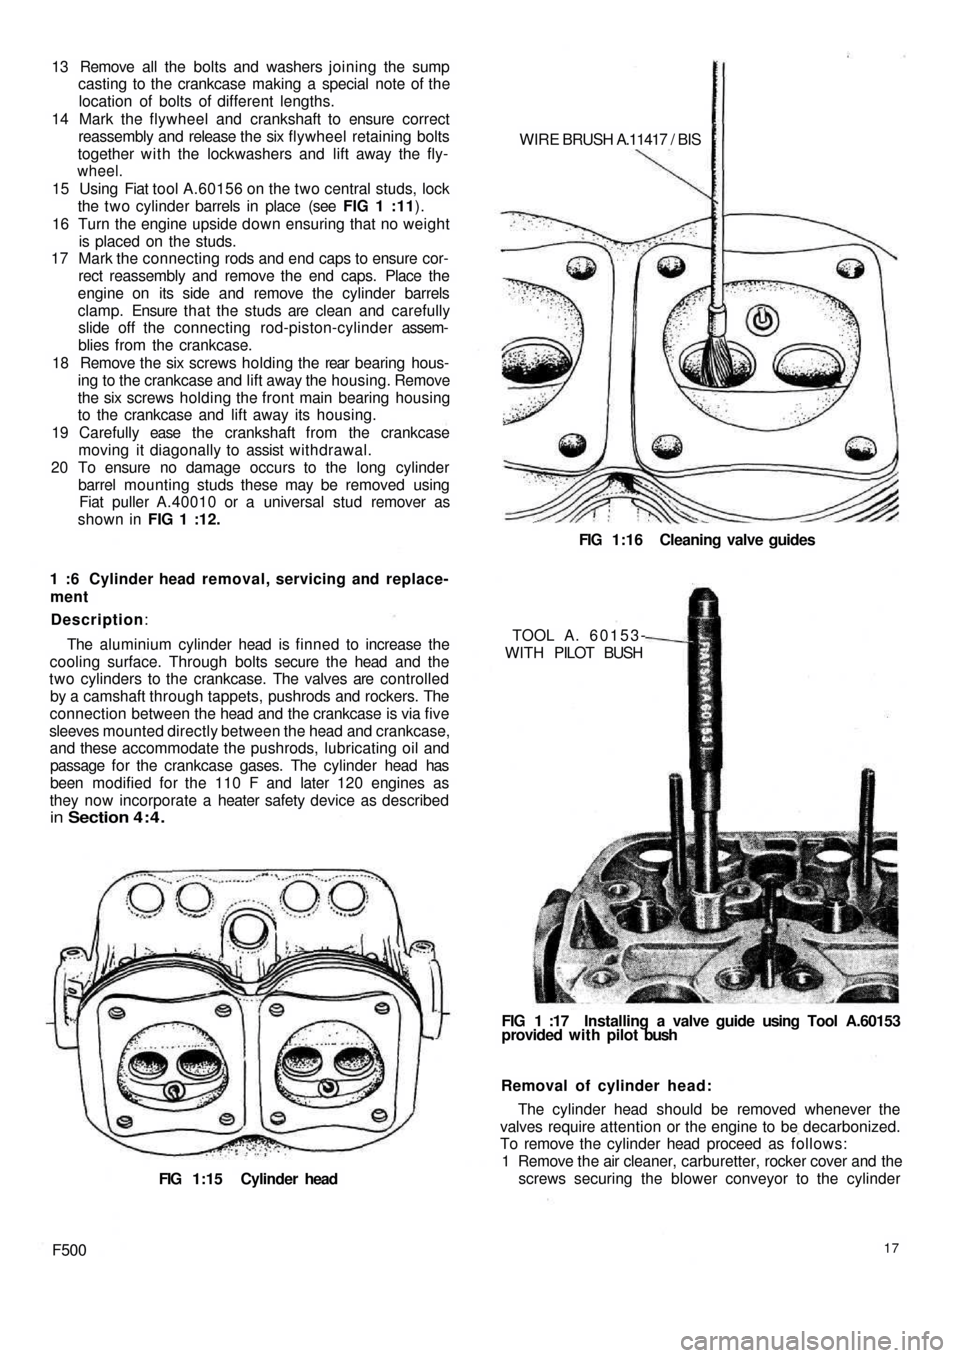 FIAT 500 1966 1.G Workshop Manual 13  Remove all the bolts and washers joining the sump
casting to the crankcase making a special note of the
location of bolts of different lengths.
14 Mark the flywheel and crankshaft to ensure correc